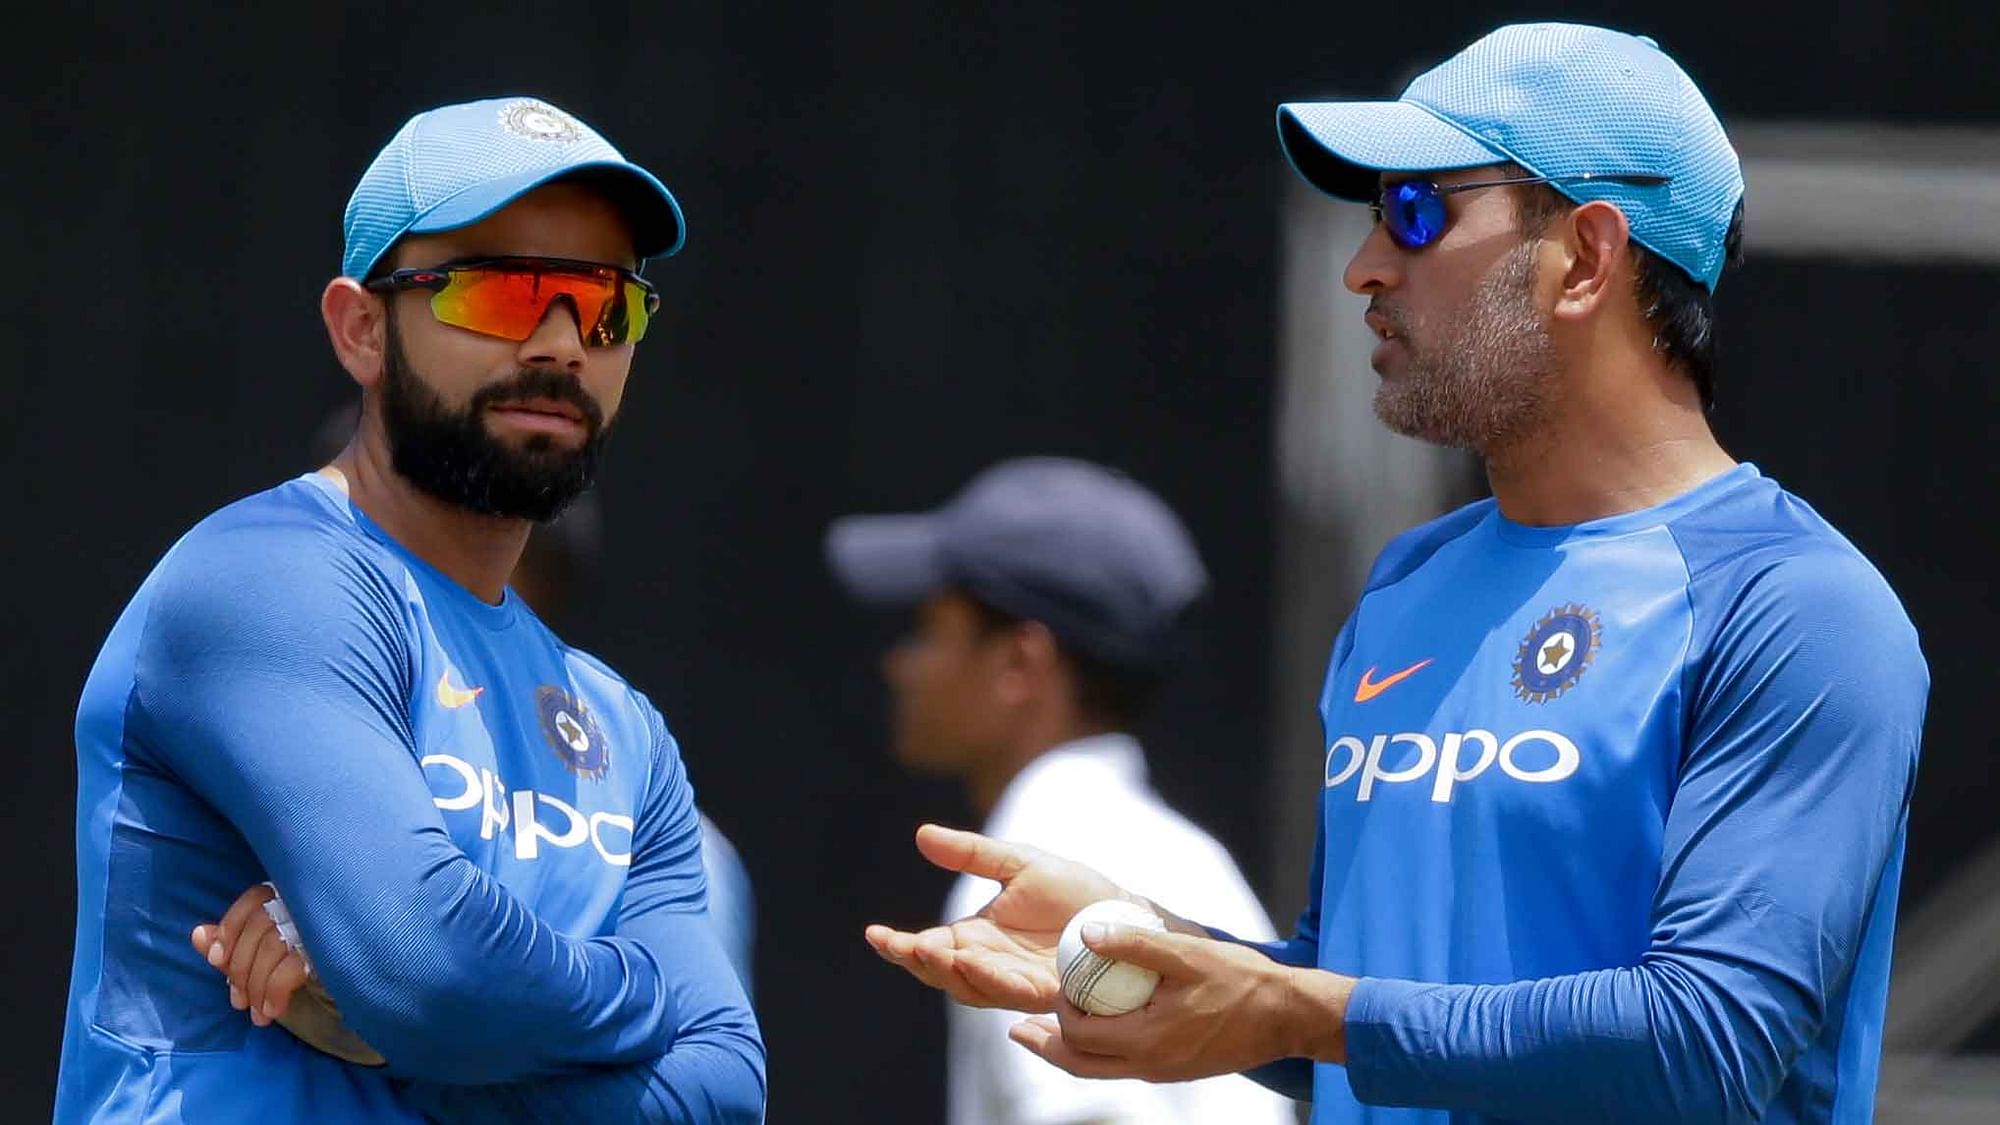 Virat Kohli and MS Dhoni have a chat during a training session.